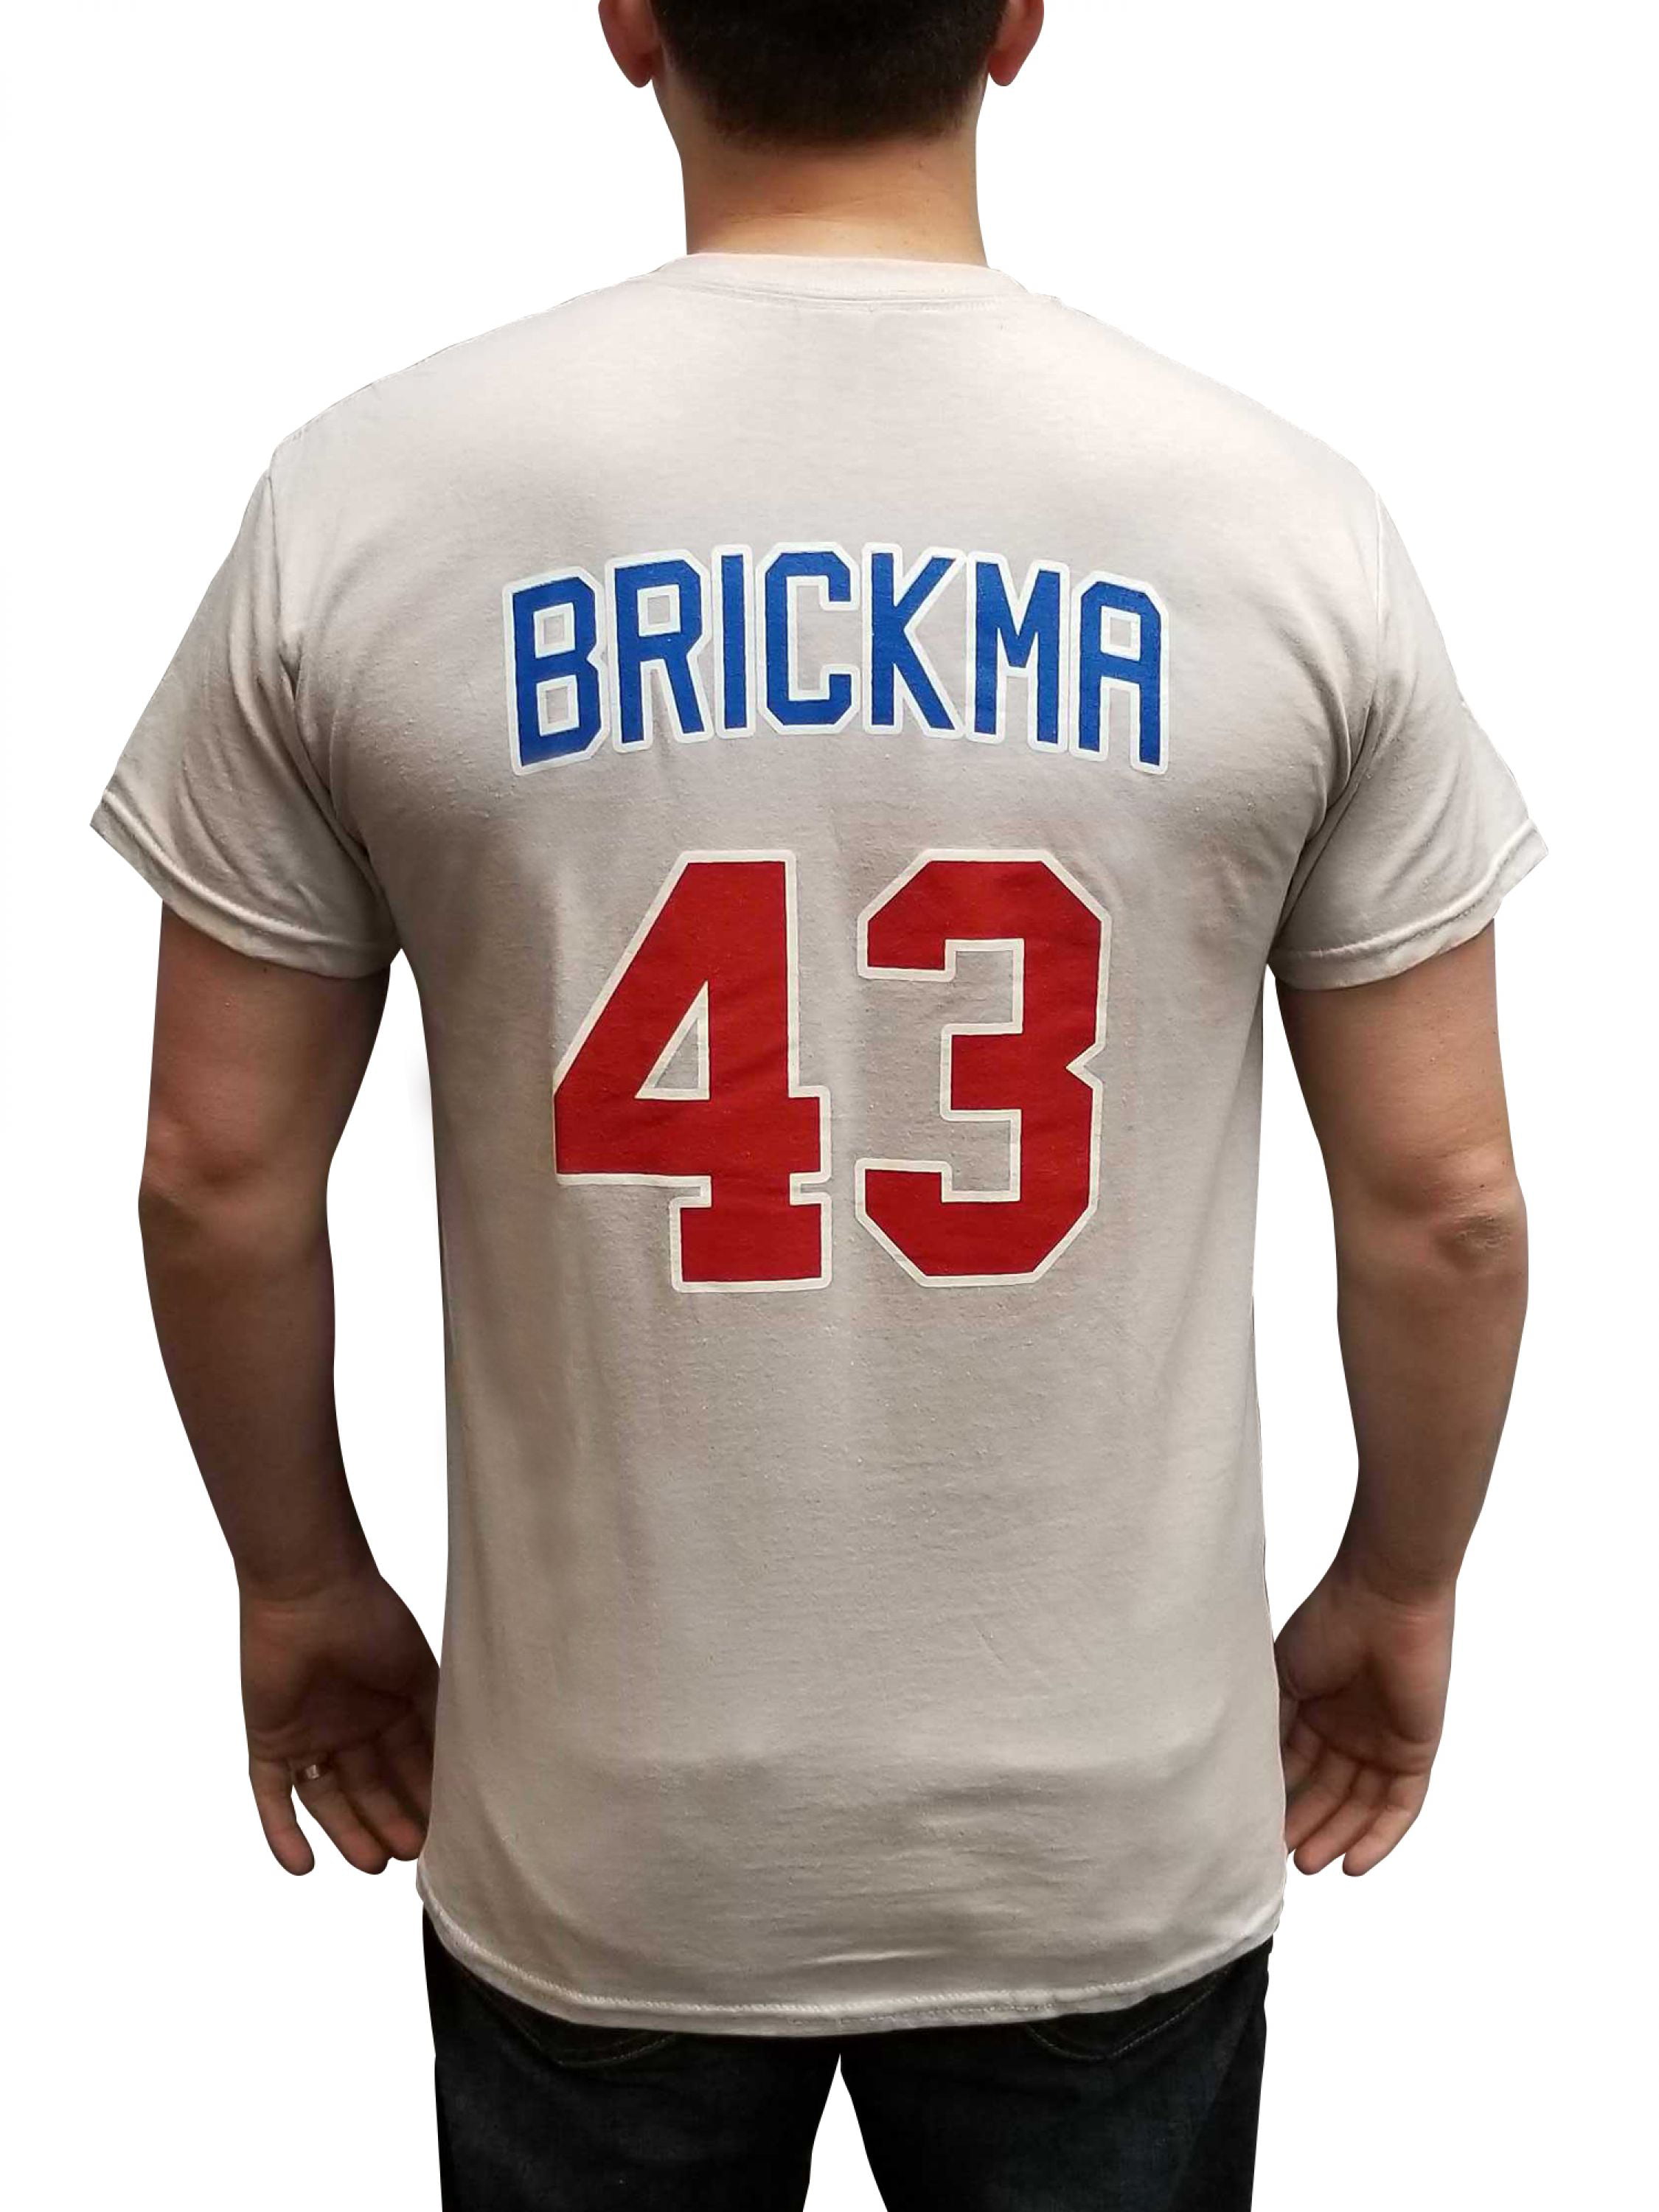 Phil Brickma Jersey T-Shirt Rookie of the Year Pitching Coach Baseball  Movie #43 